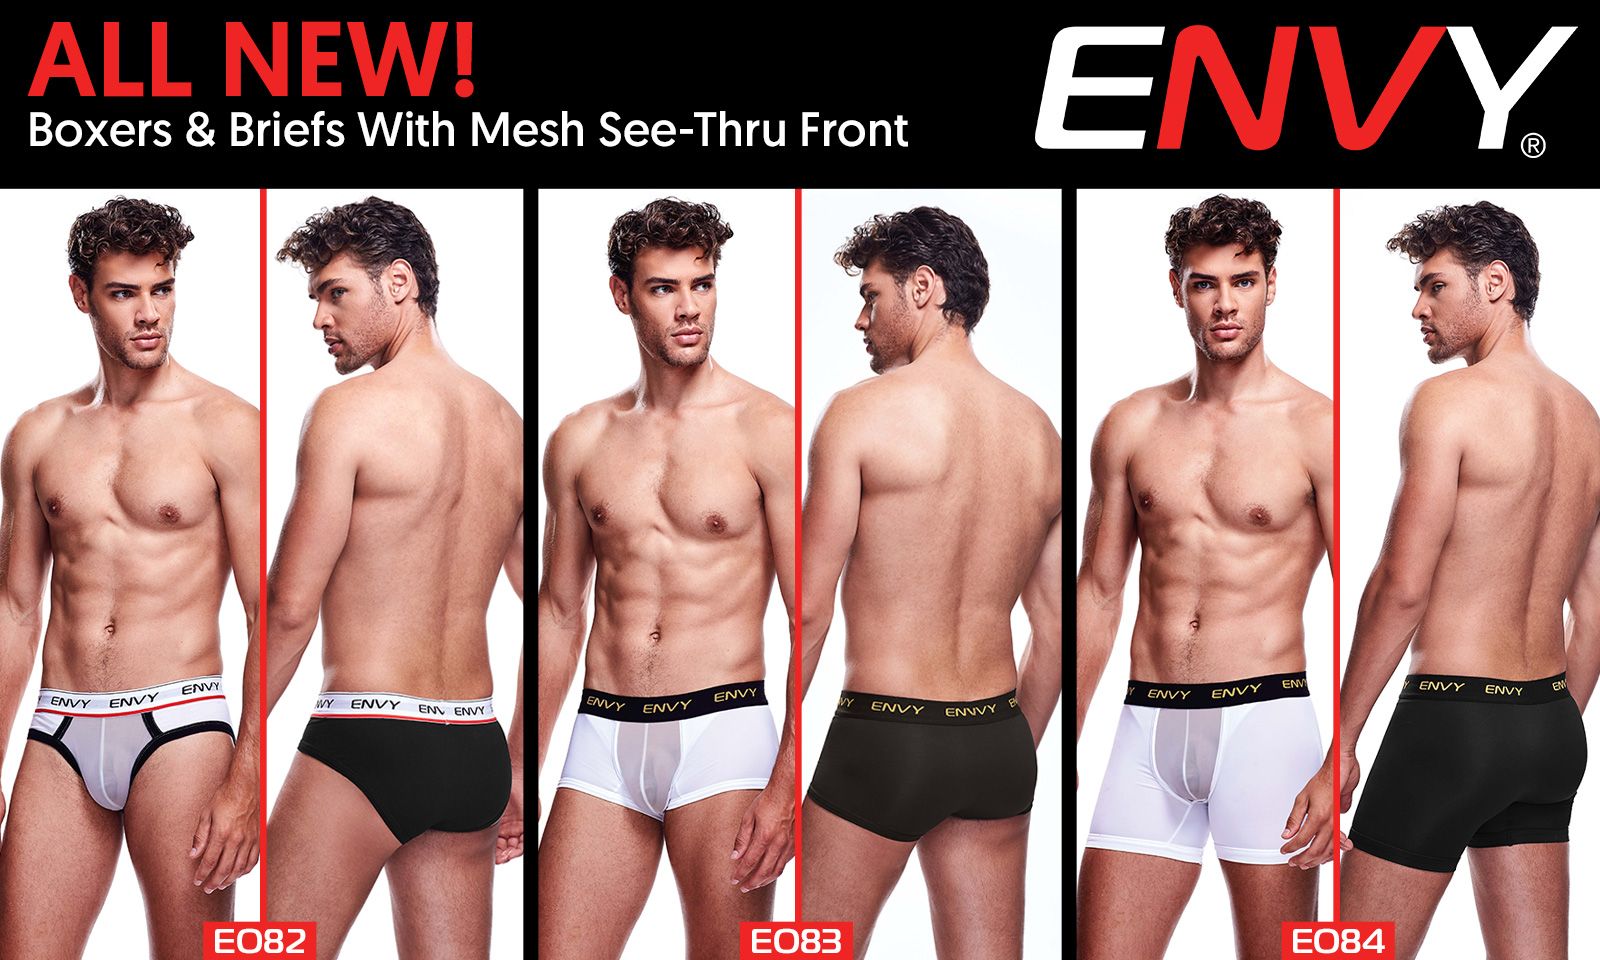 Xgen Products Begins Shipping New Envy Mesh Front Underwear